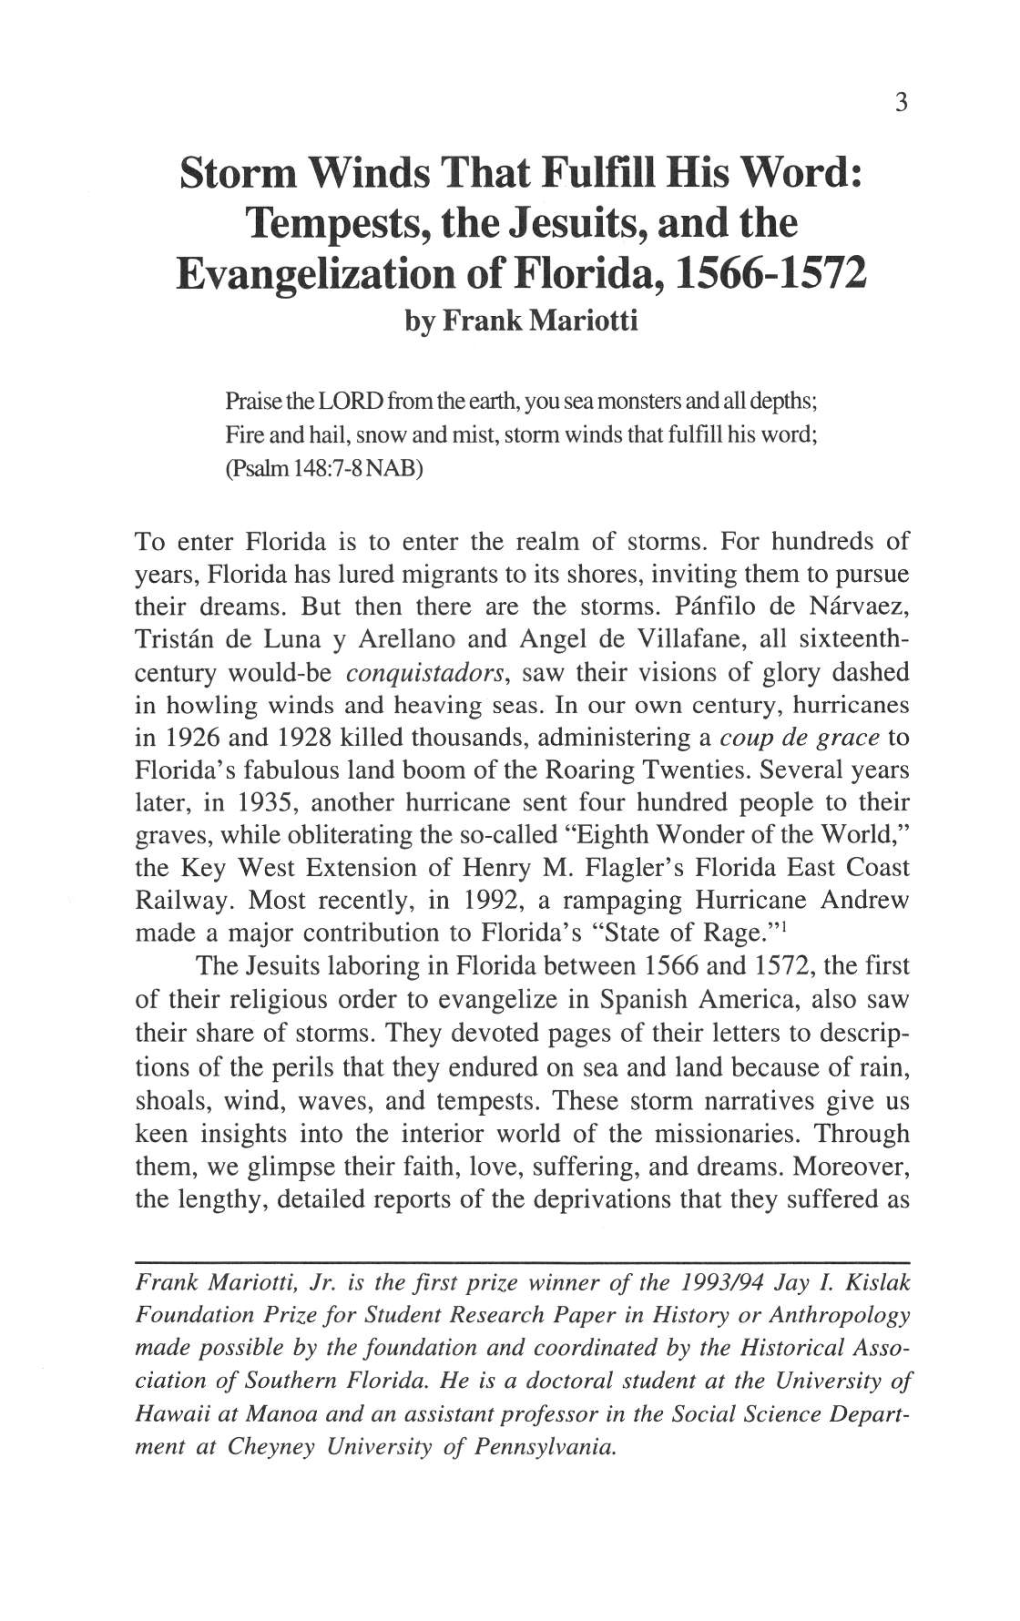 Storm Winds That Fulfill His Word: Tempests, the Jesuits, and the Evangelization of Florida, 1566-1572 by Frank Mariotti